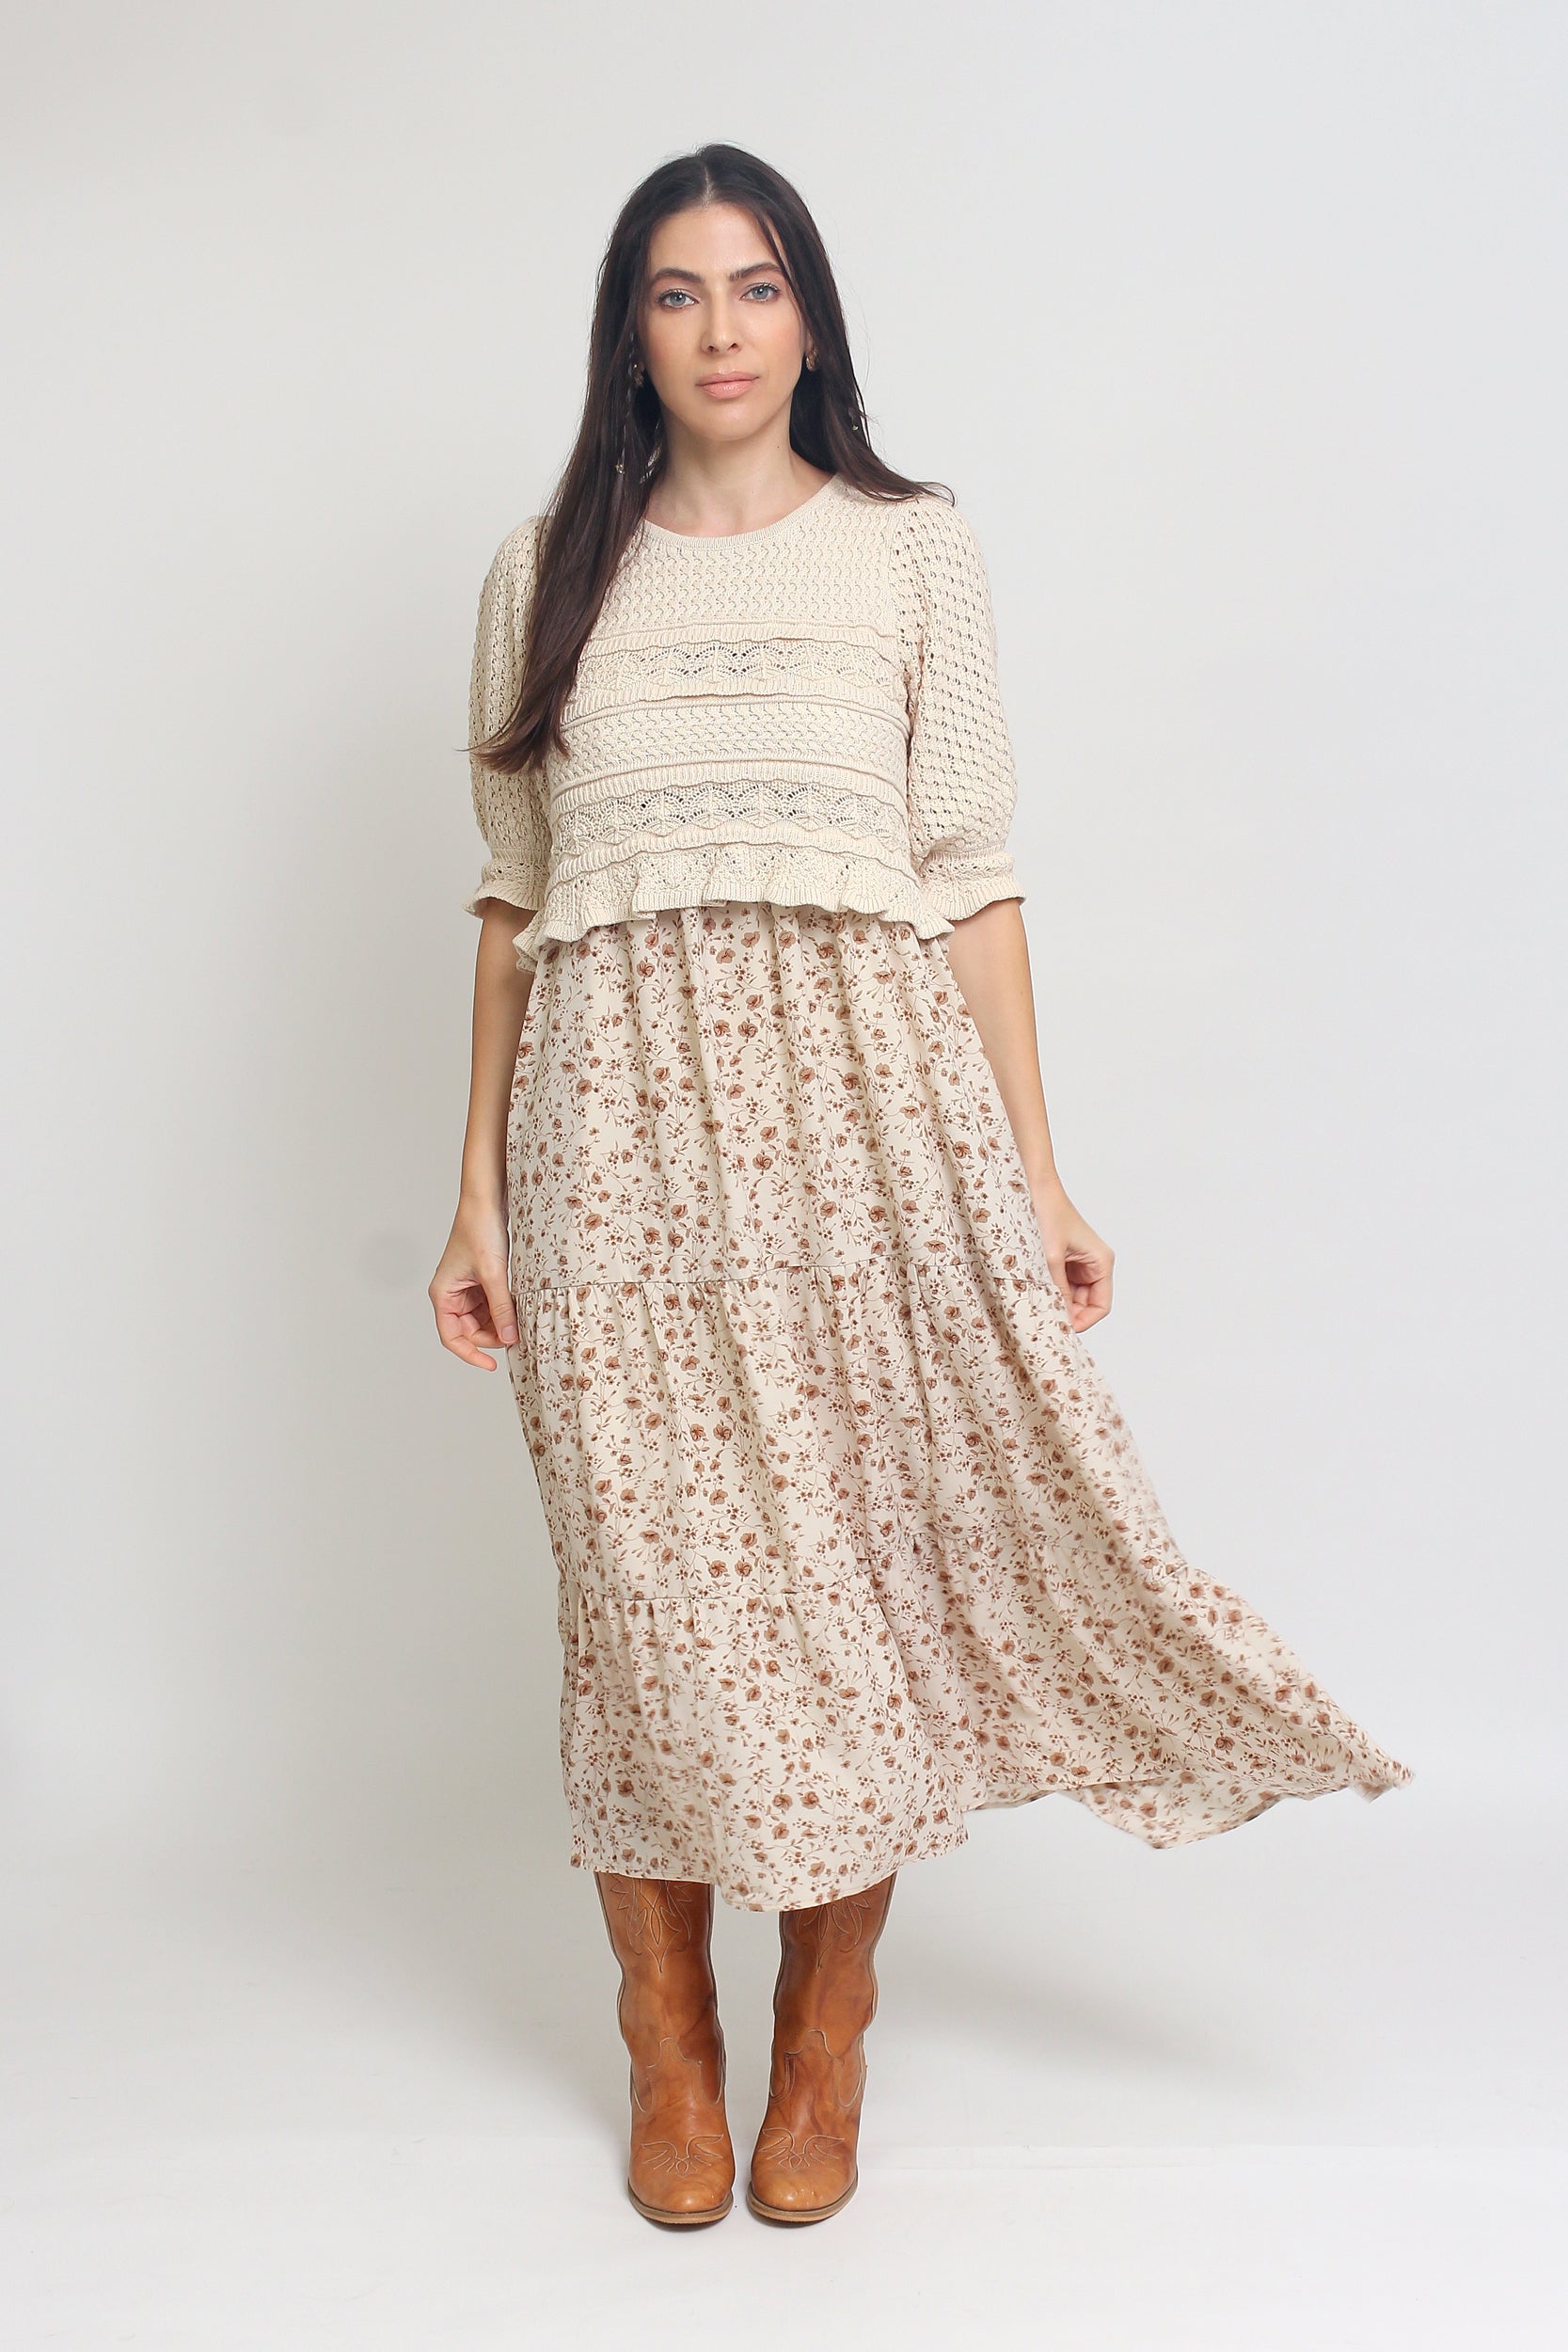 Jacquard sweater top with puff sleeves, in natural. Image 2